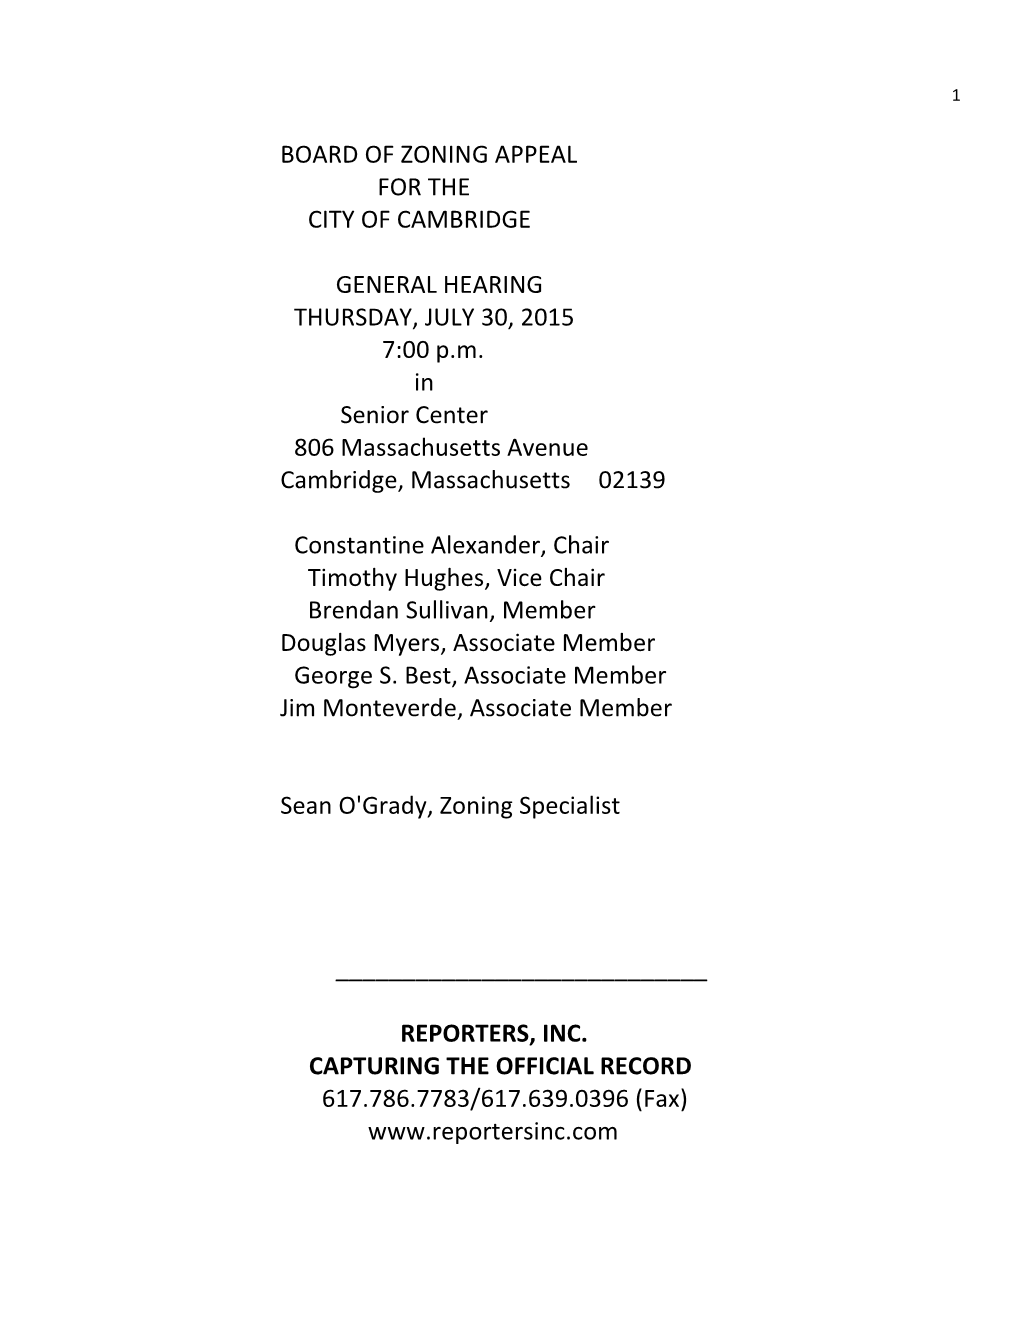 BOARD of ZONING APPEAL for the CITY of CAMBRIDGE GENERAL HEARING THURSDAY, JULY 30, 2015 7:00 P.M. in Senior Center 806 Massach